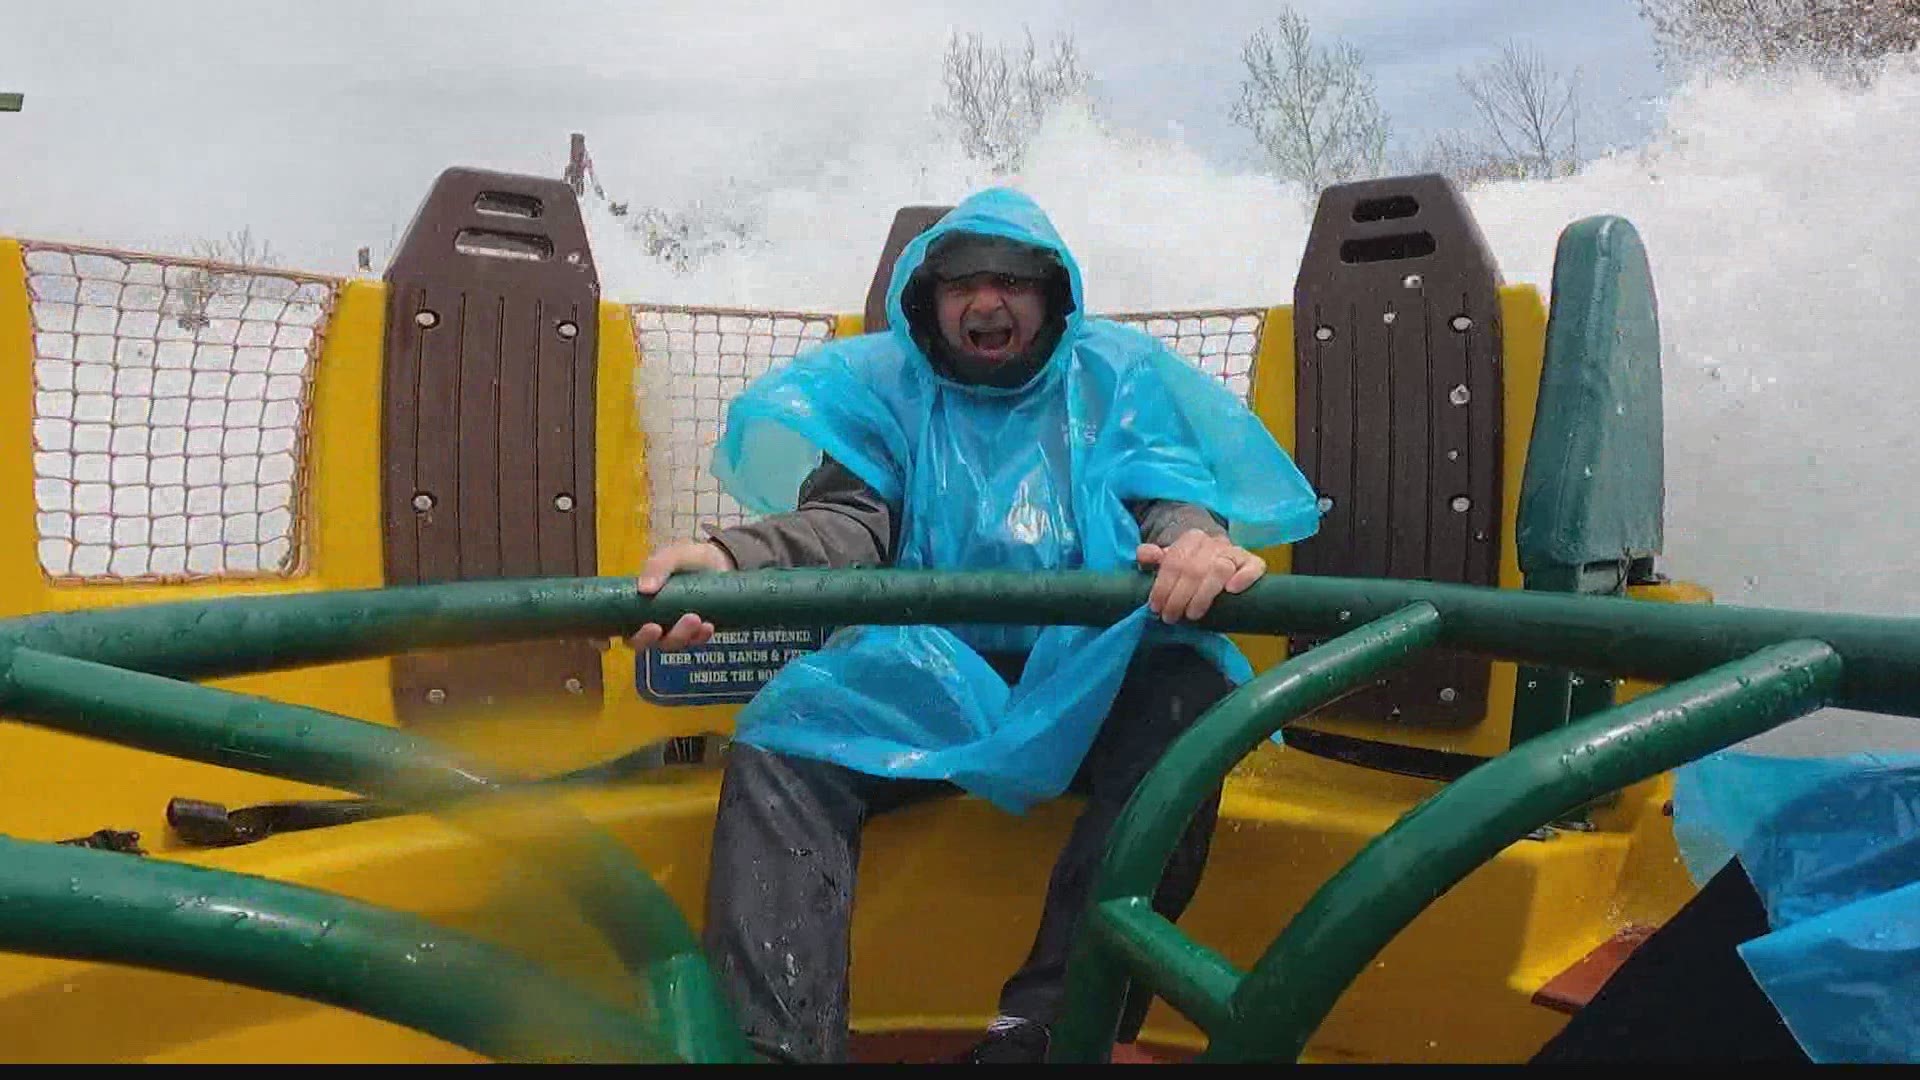 The theme park in Branson, Missouri is a family favorite and Chuck had a great time there!